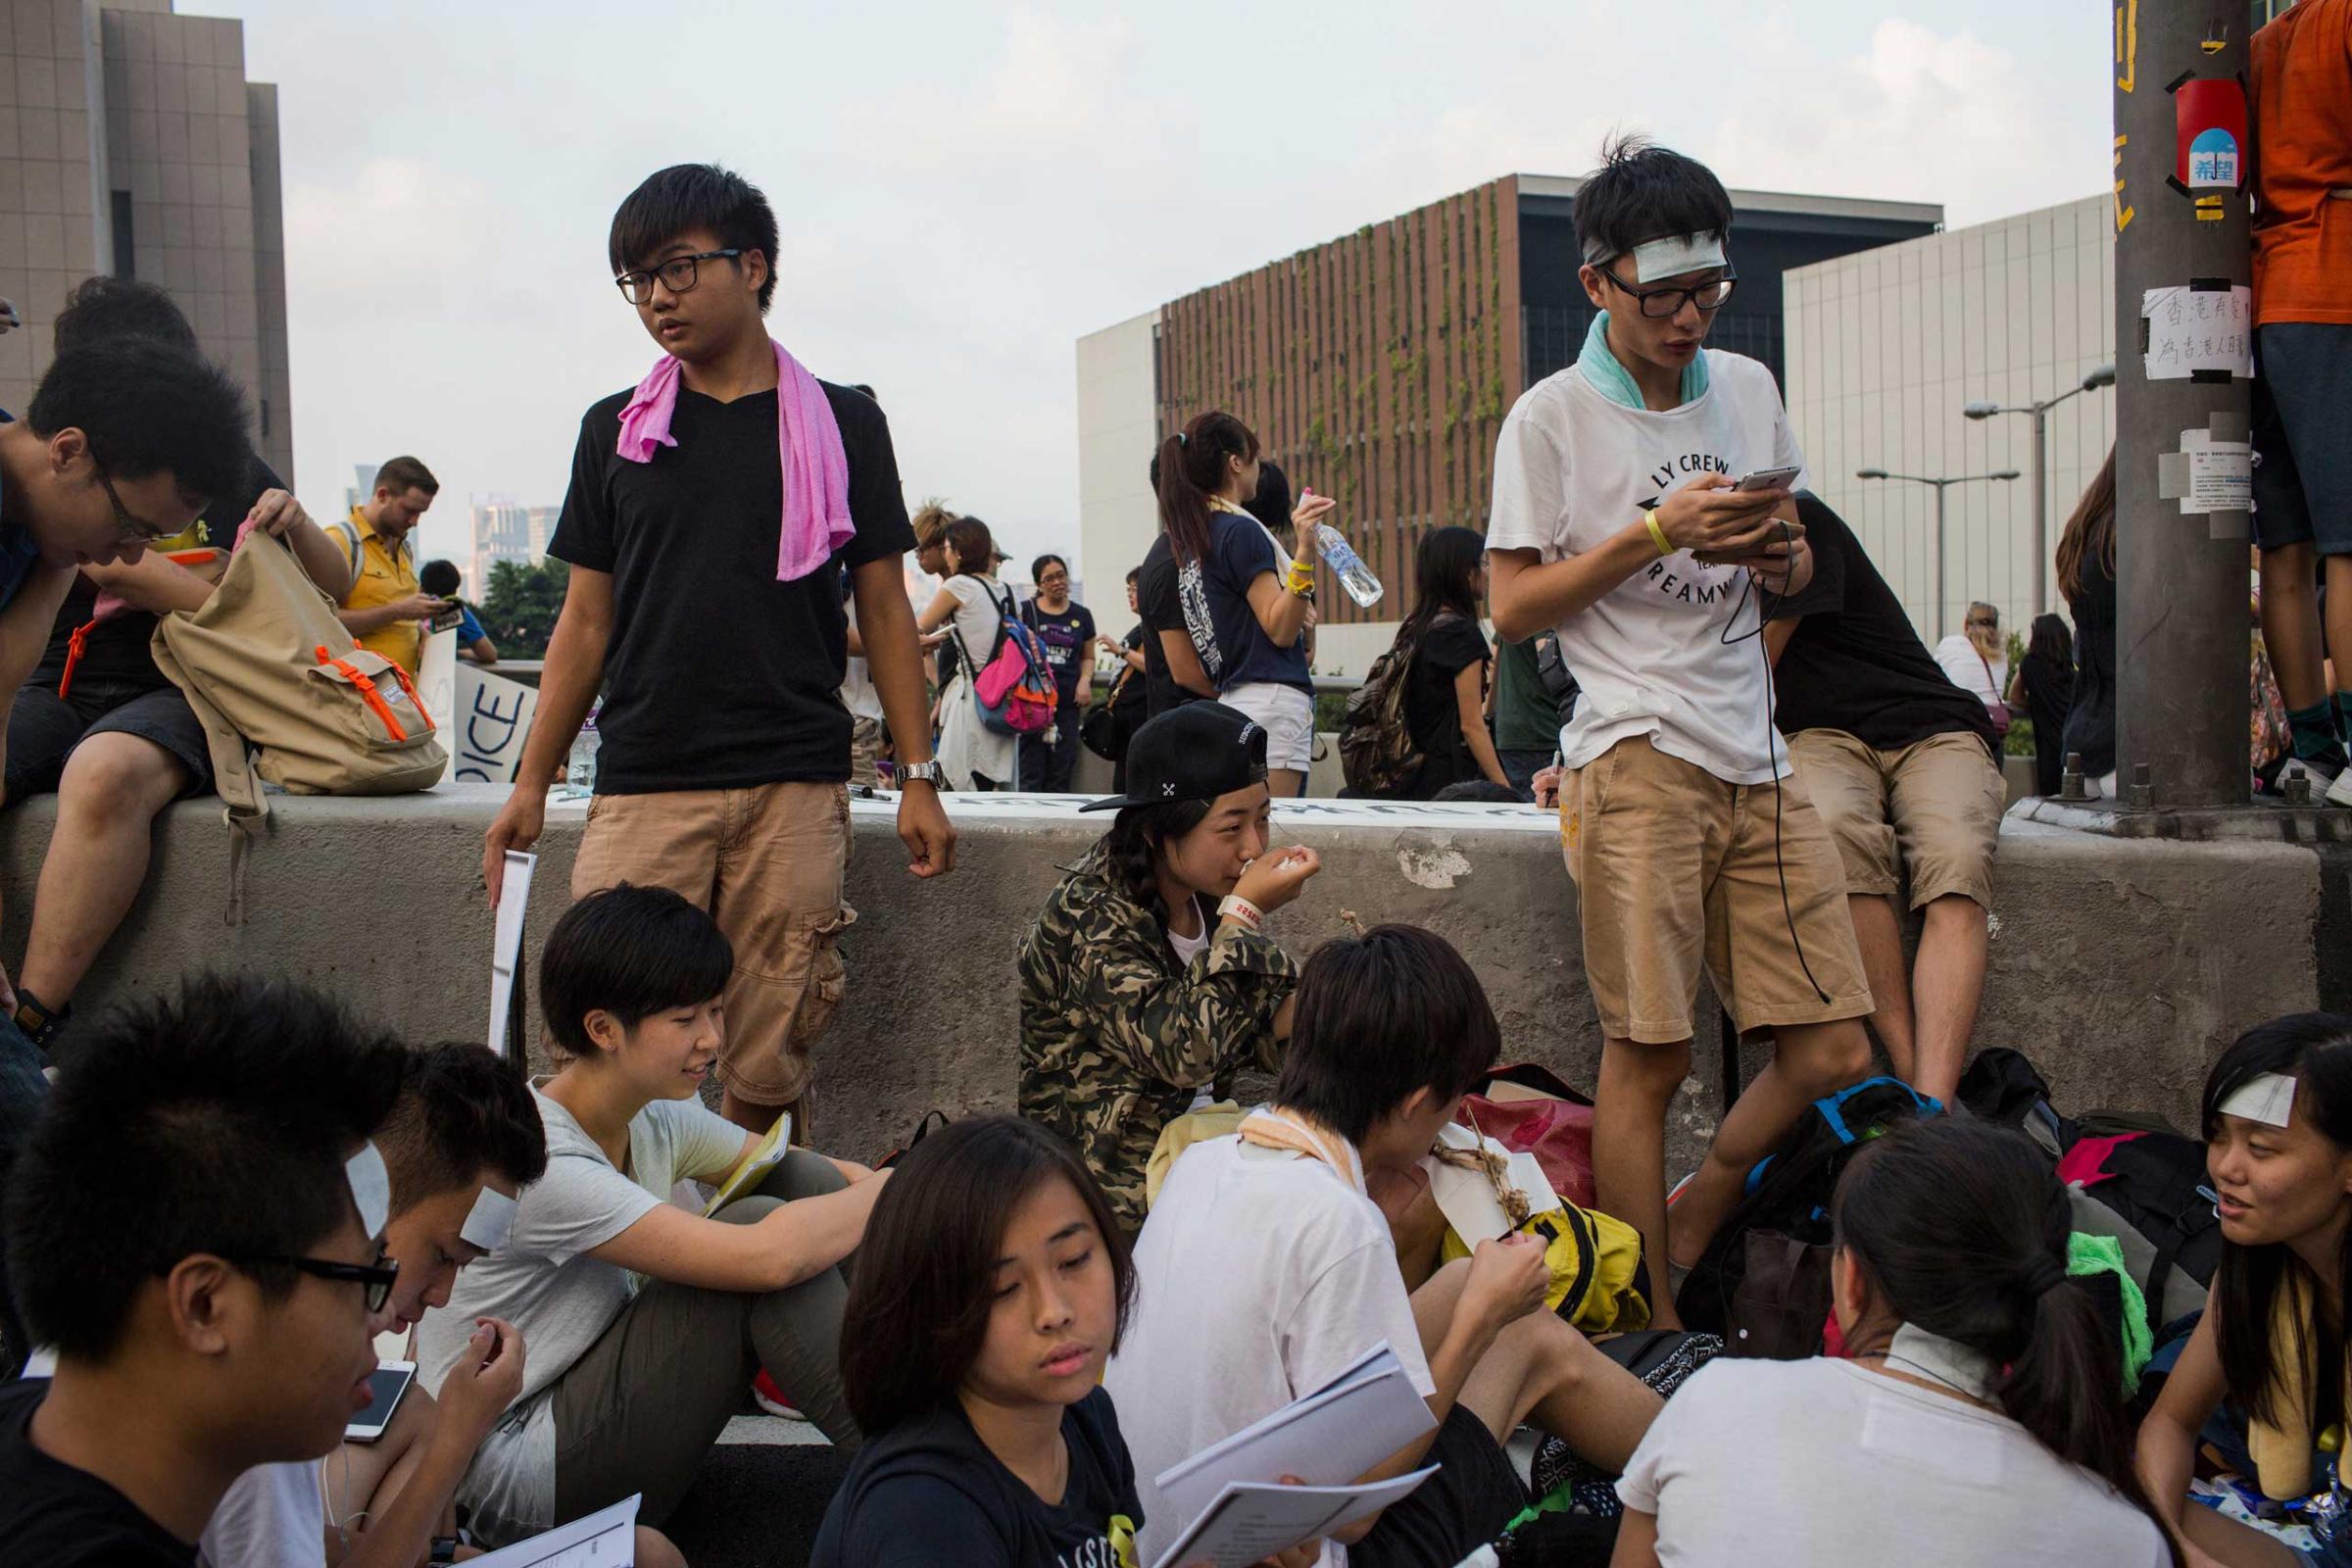 Students from various universities continue their protest in the streets of Hong Kong, Oct. 1, 2014.